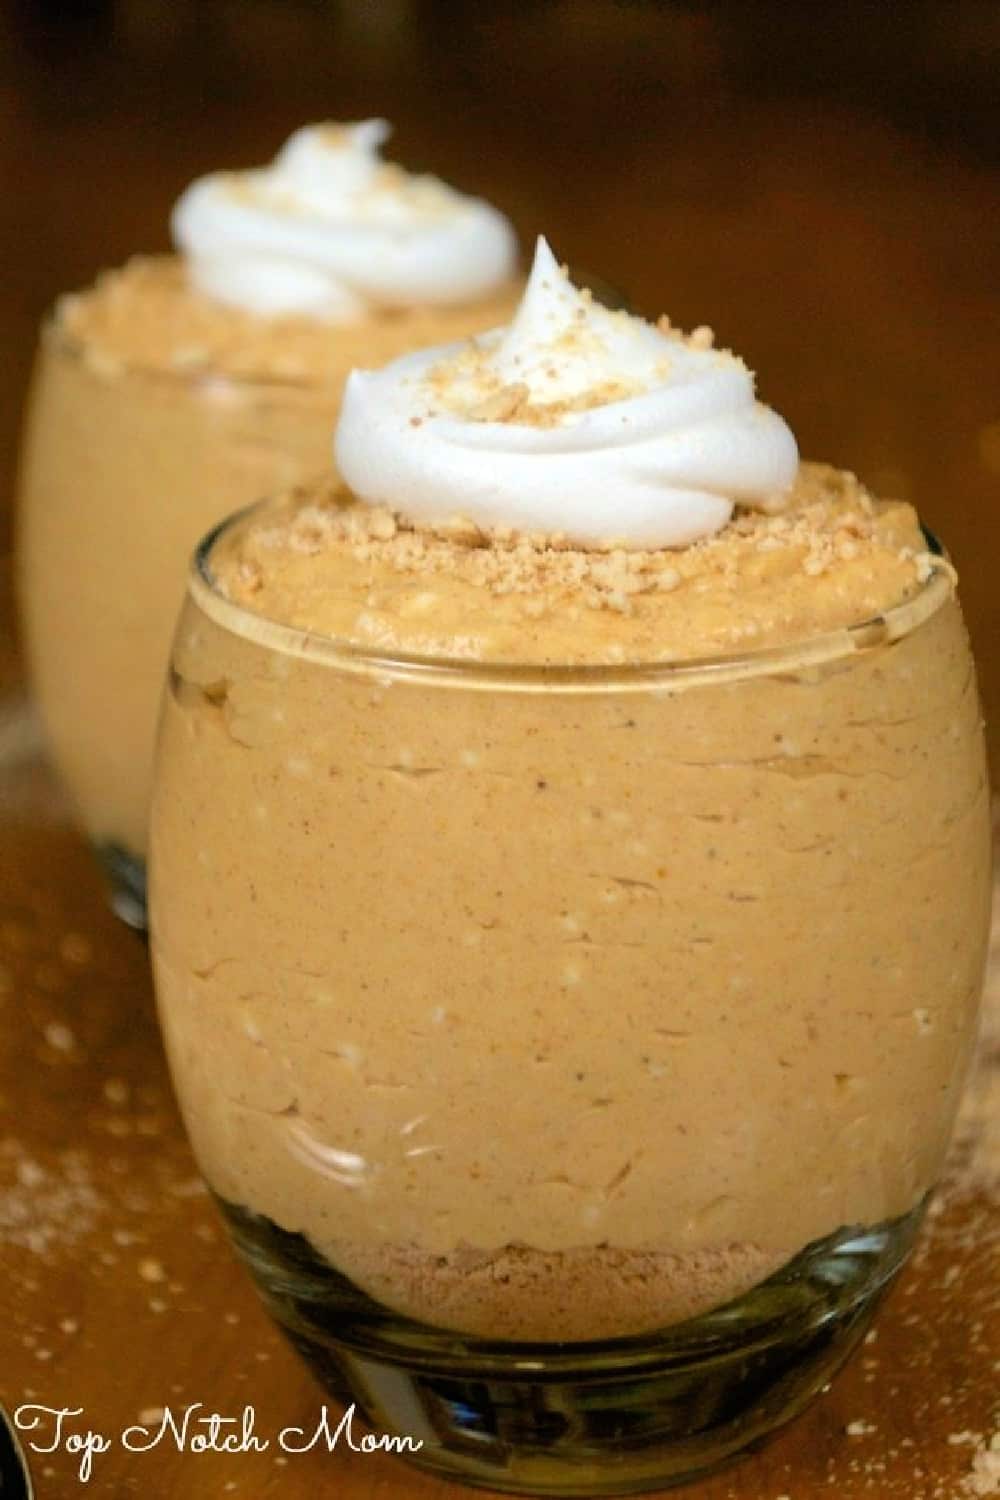 These creamy pumpkin cheesecake cups are the perfect Fall no-bake treat. It's a quick and easy delicious dessert that's fabulous for Fall. #pumpkinspice #nobakedessert #pumpkindessert via @jugglingactmama